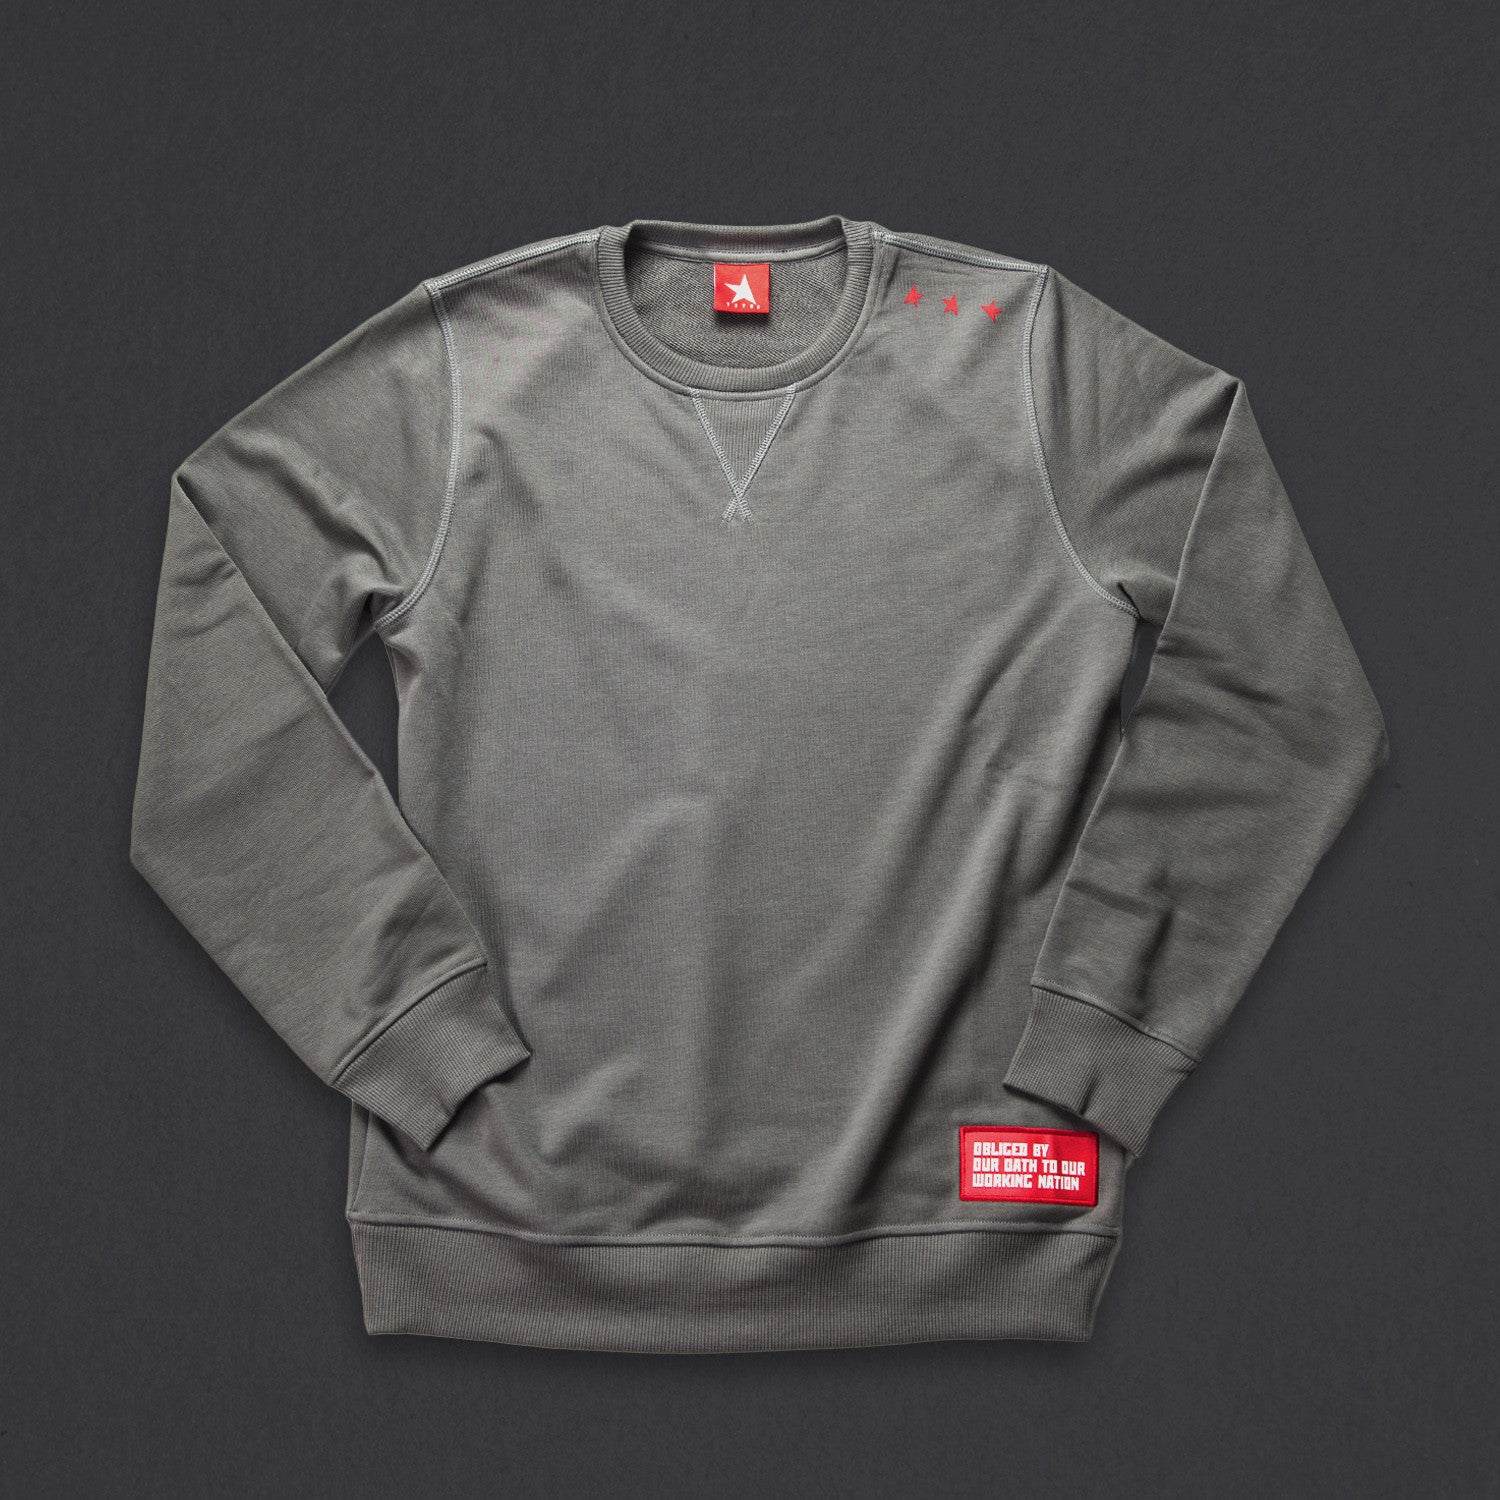 15th wmn's TITOS crewneck pewter/red small 3 star logo